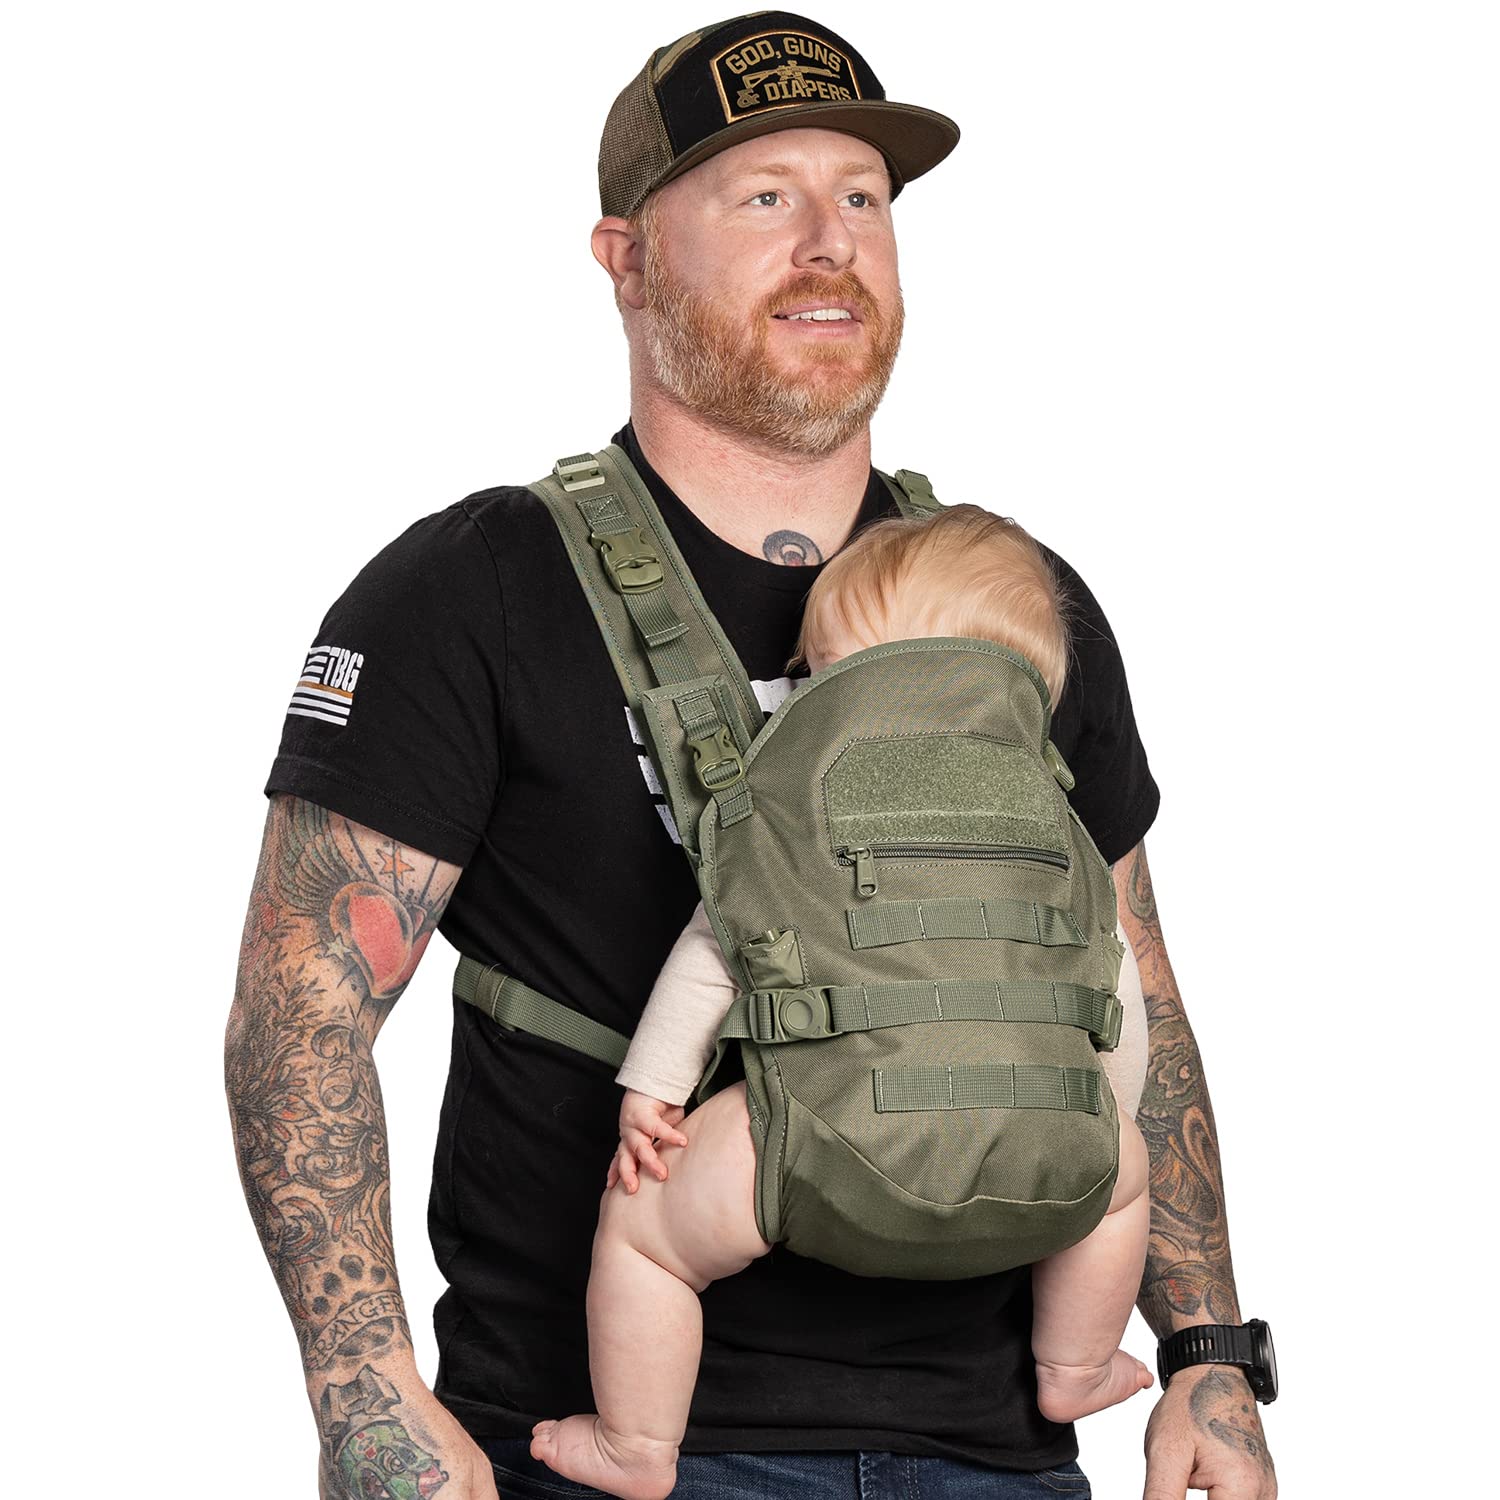 The Baby Holster